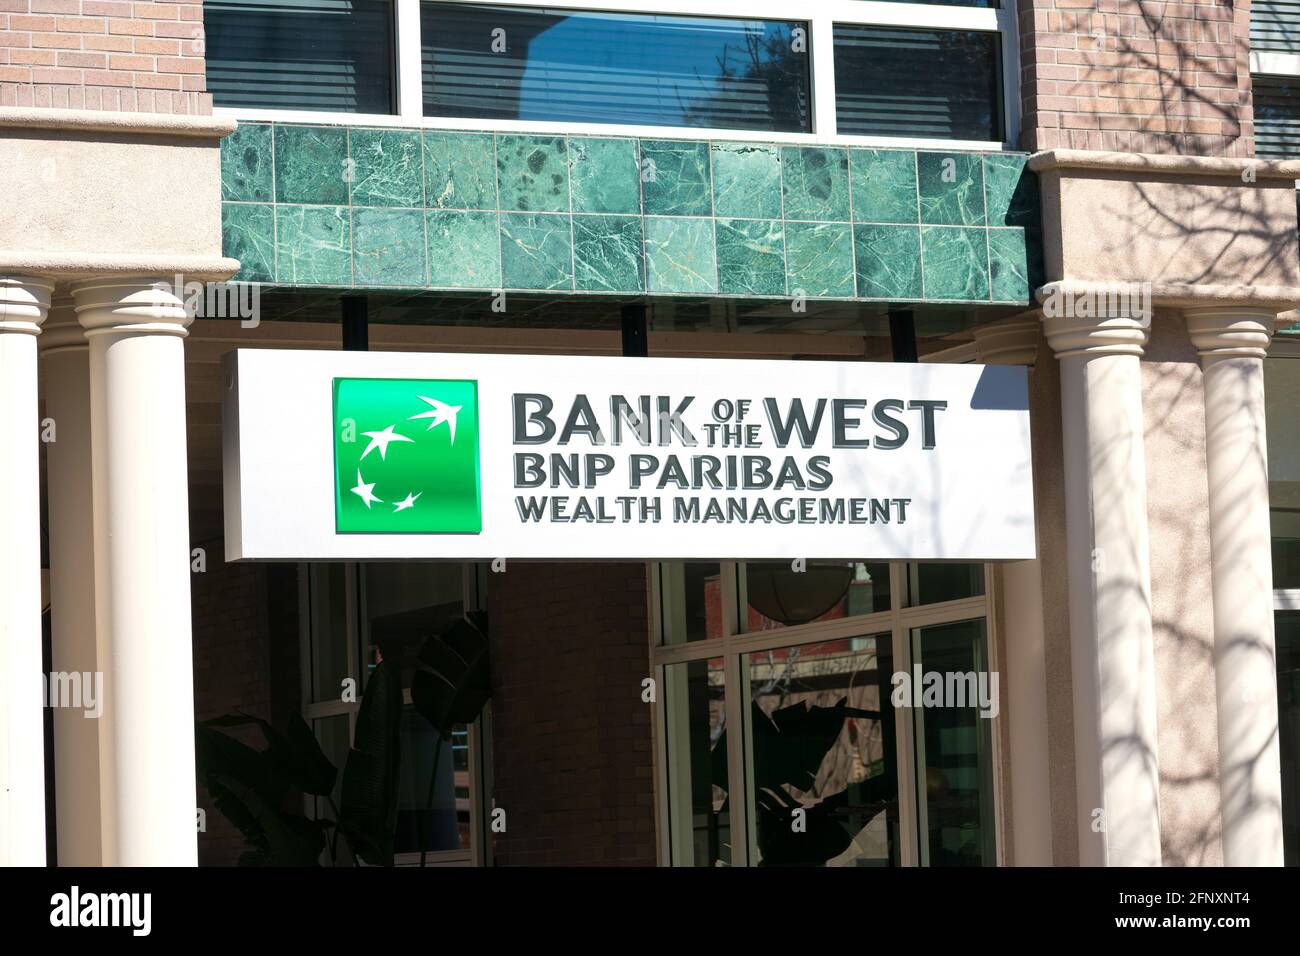 Bank of the West BNP Paribas Wealth Management sign, logo on the branch office facade. - Palo Alto, California, USA - 2021 Stock Photo